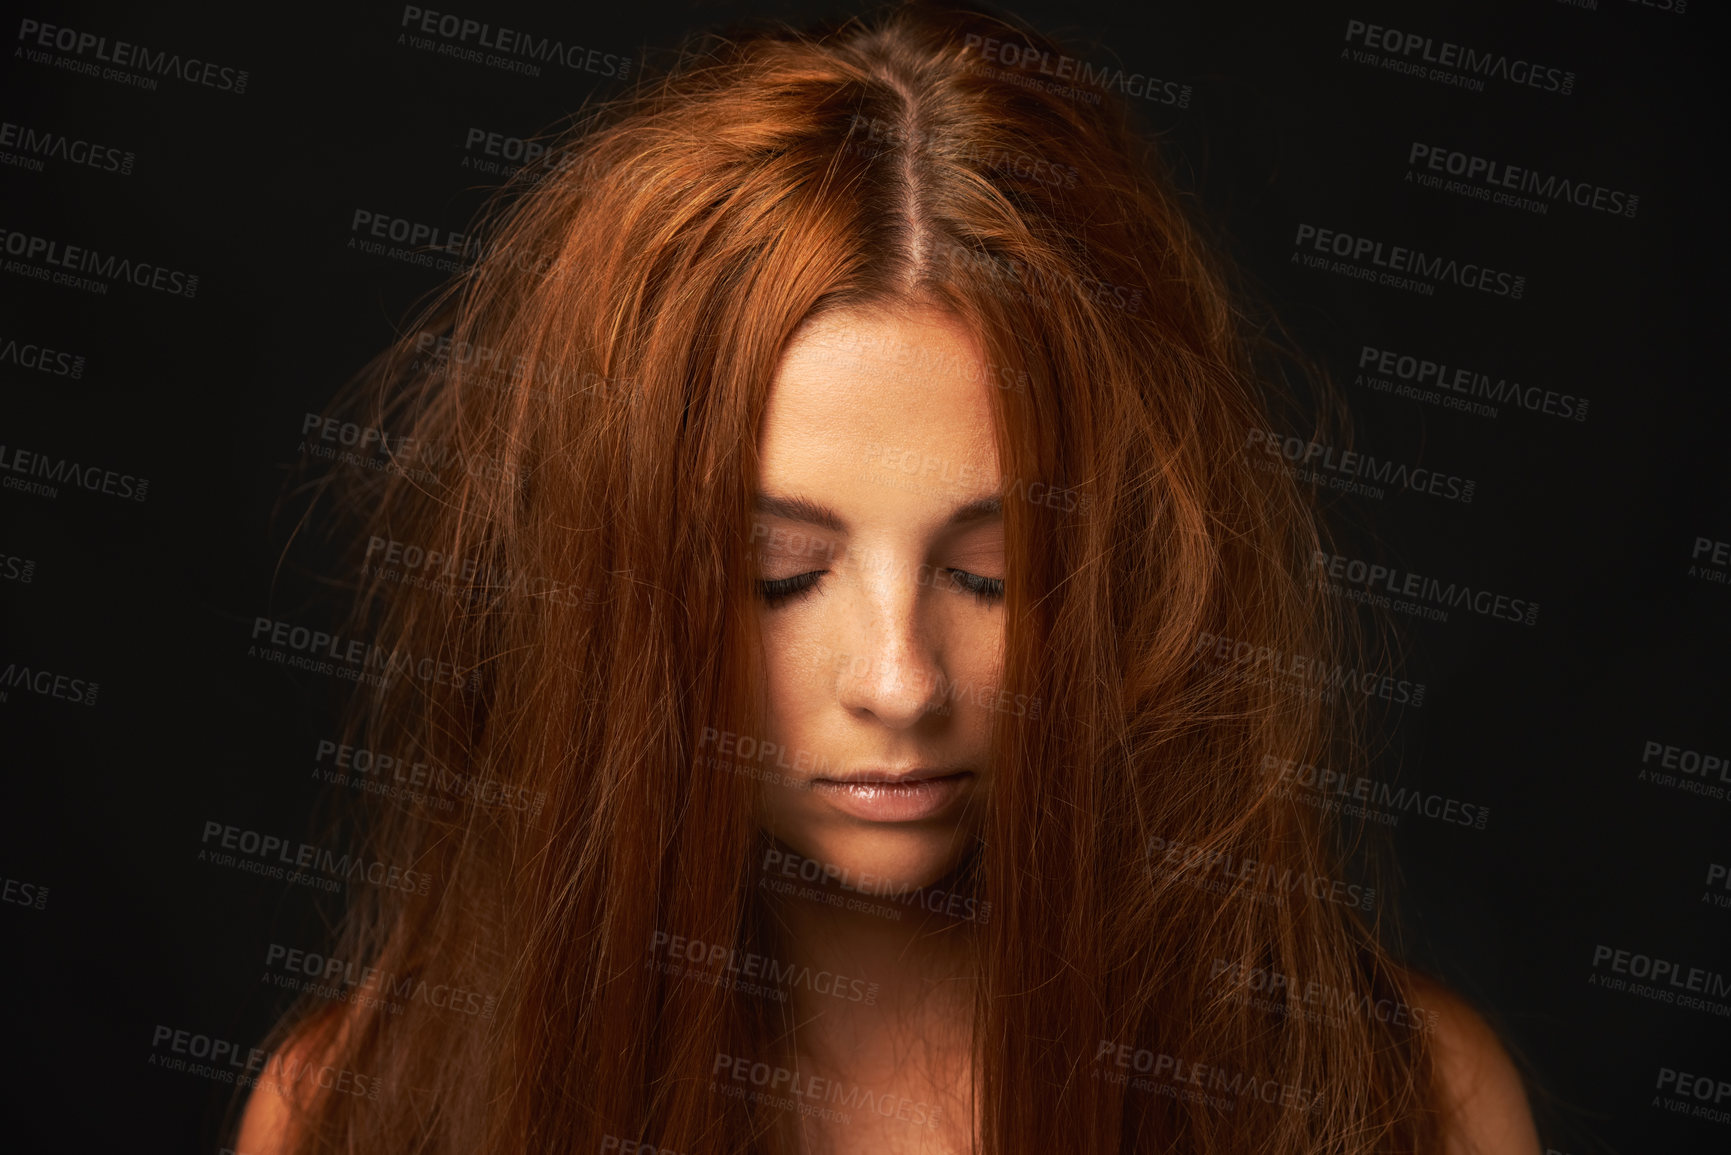 Buy stock photo A pretty redhead with messy hair